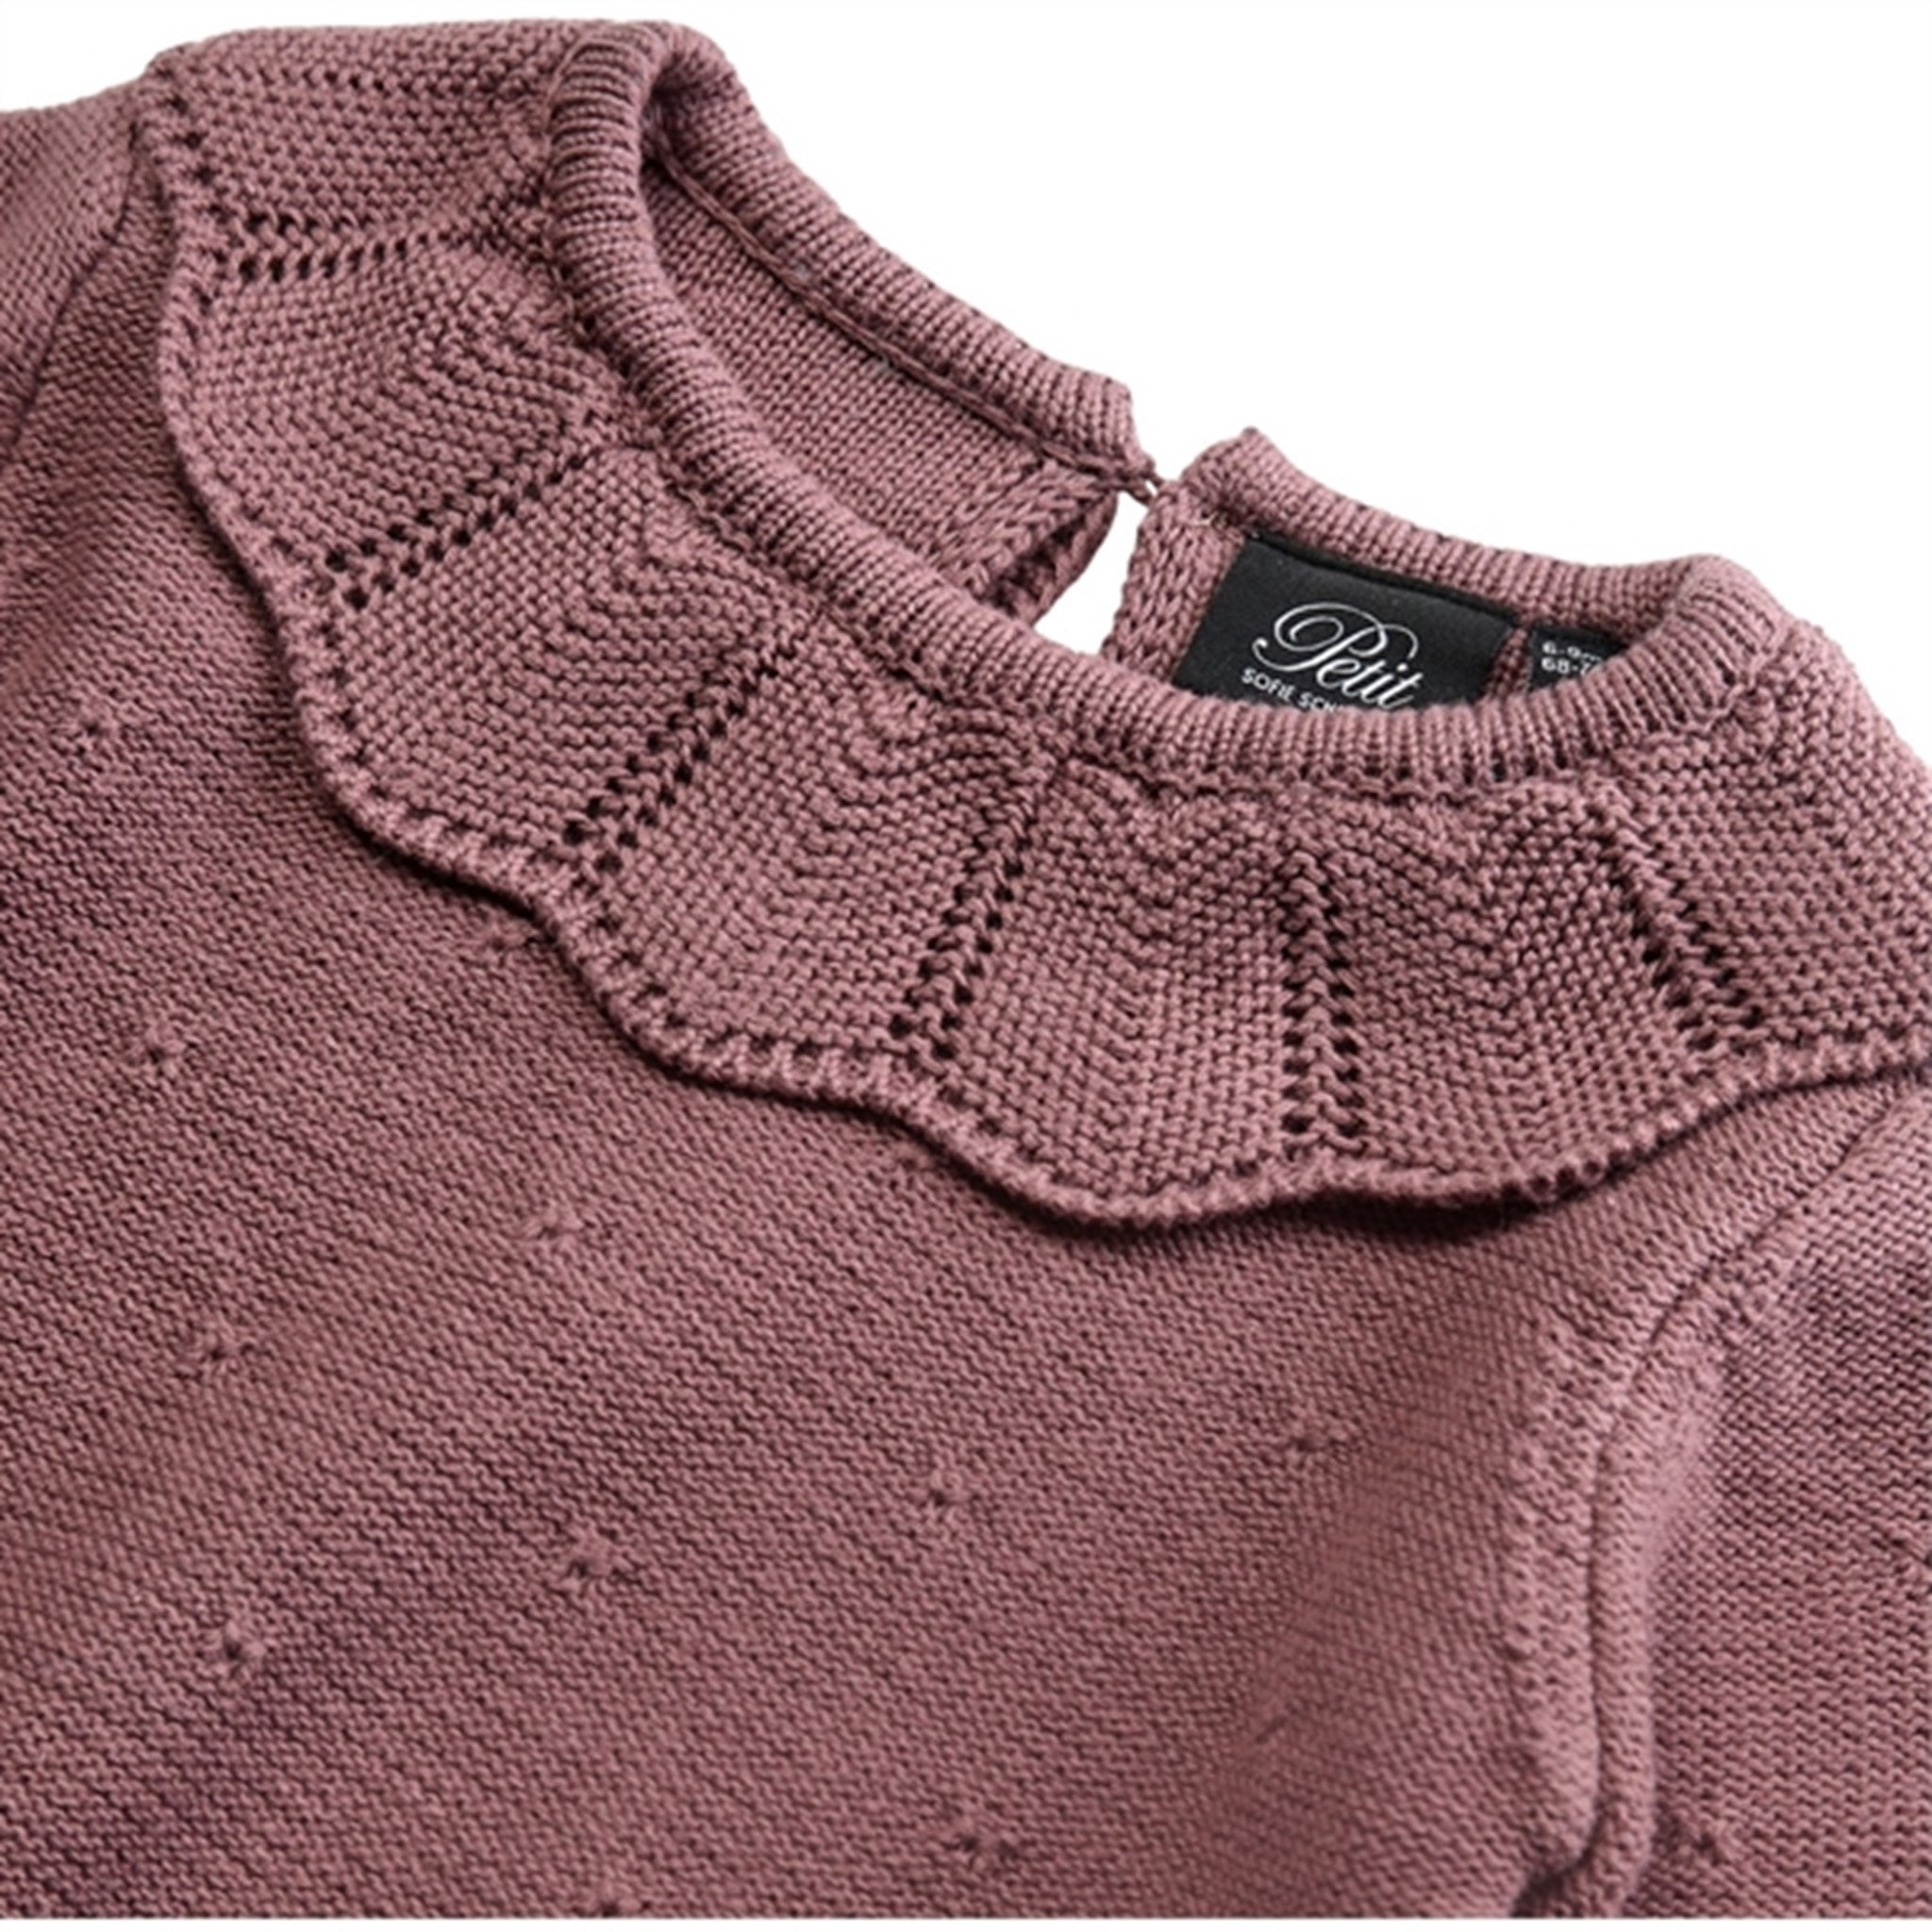 Sofie Schnoor Bright Lilac Knit 5